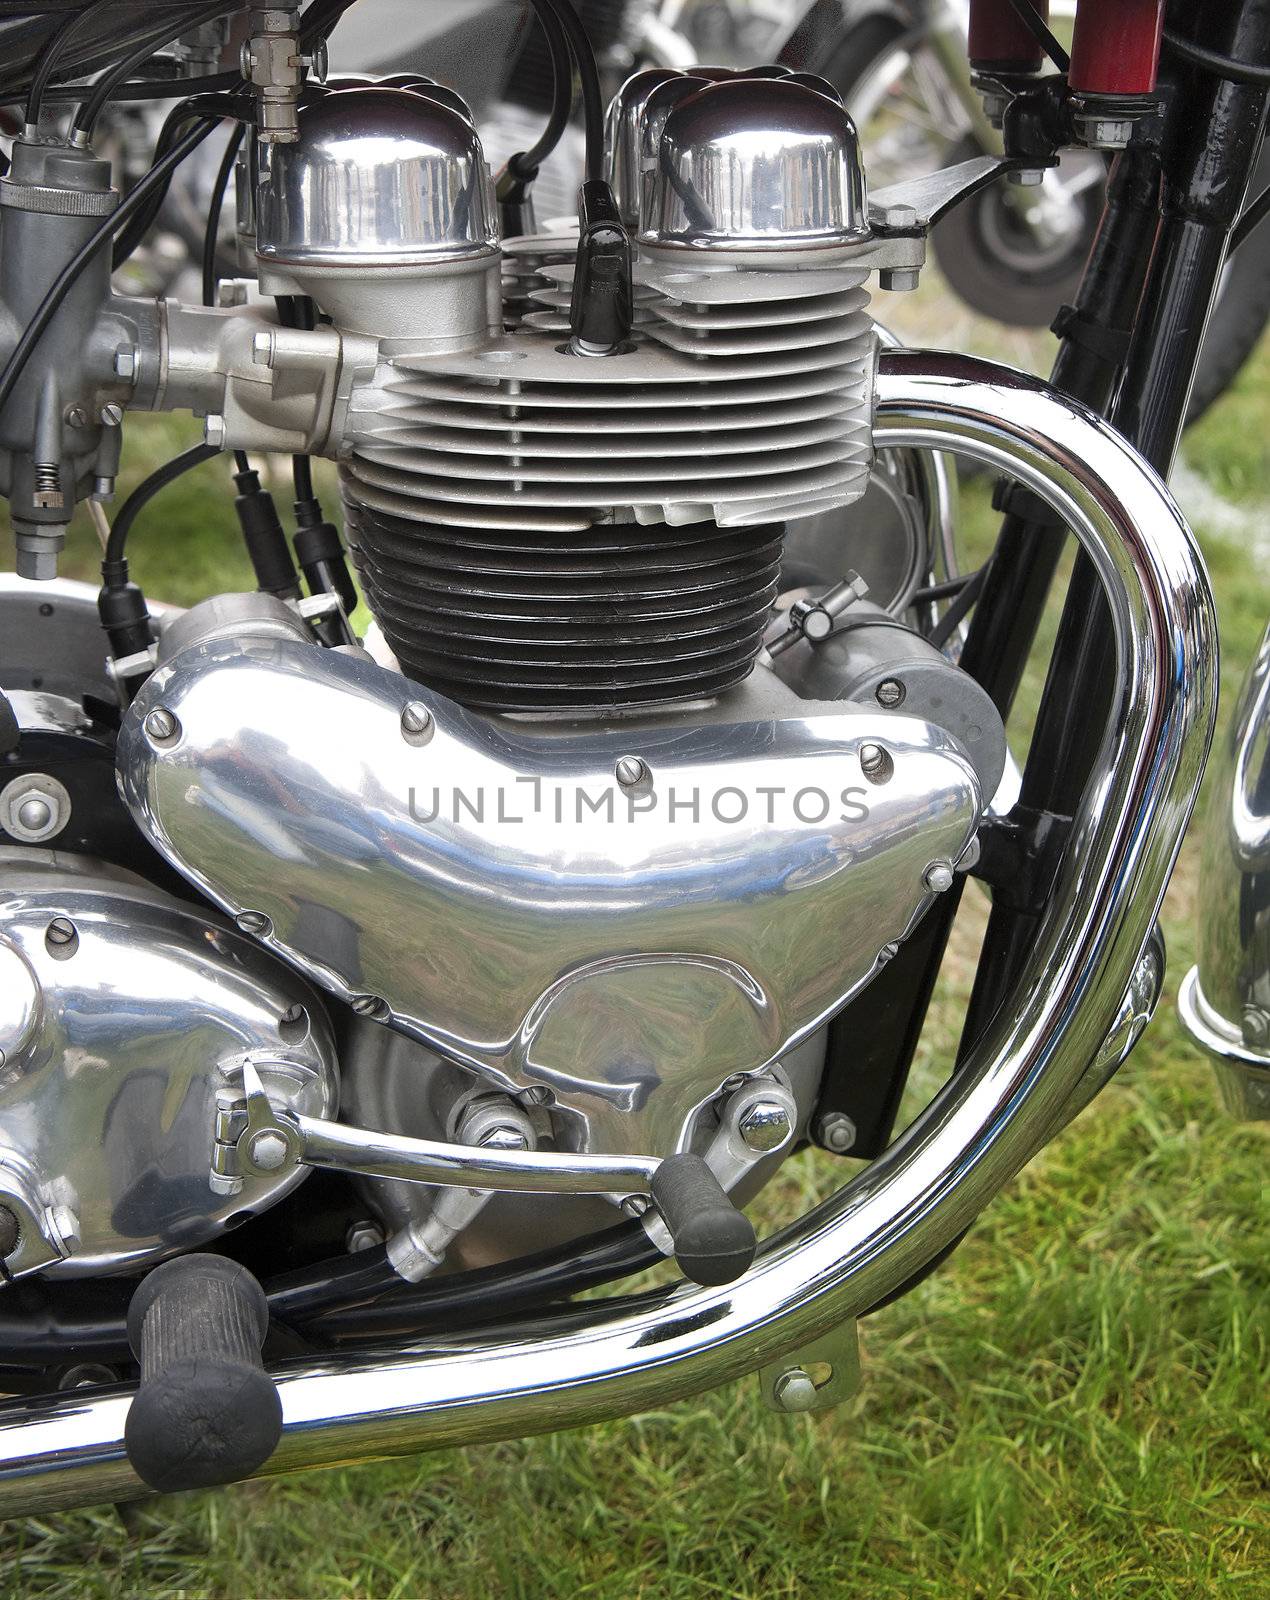 Vintage motorcycle engine by f/2sumicron